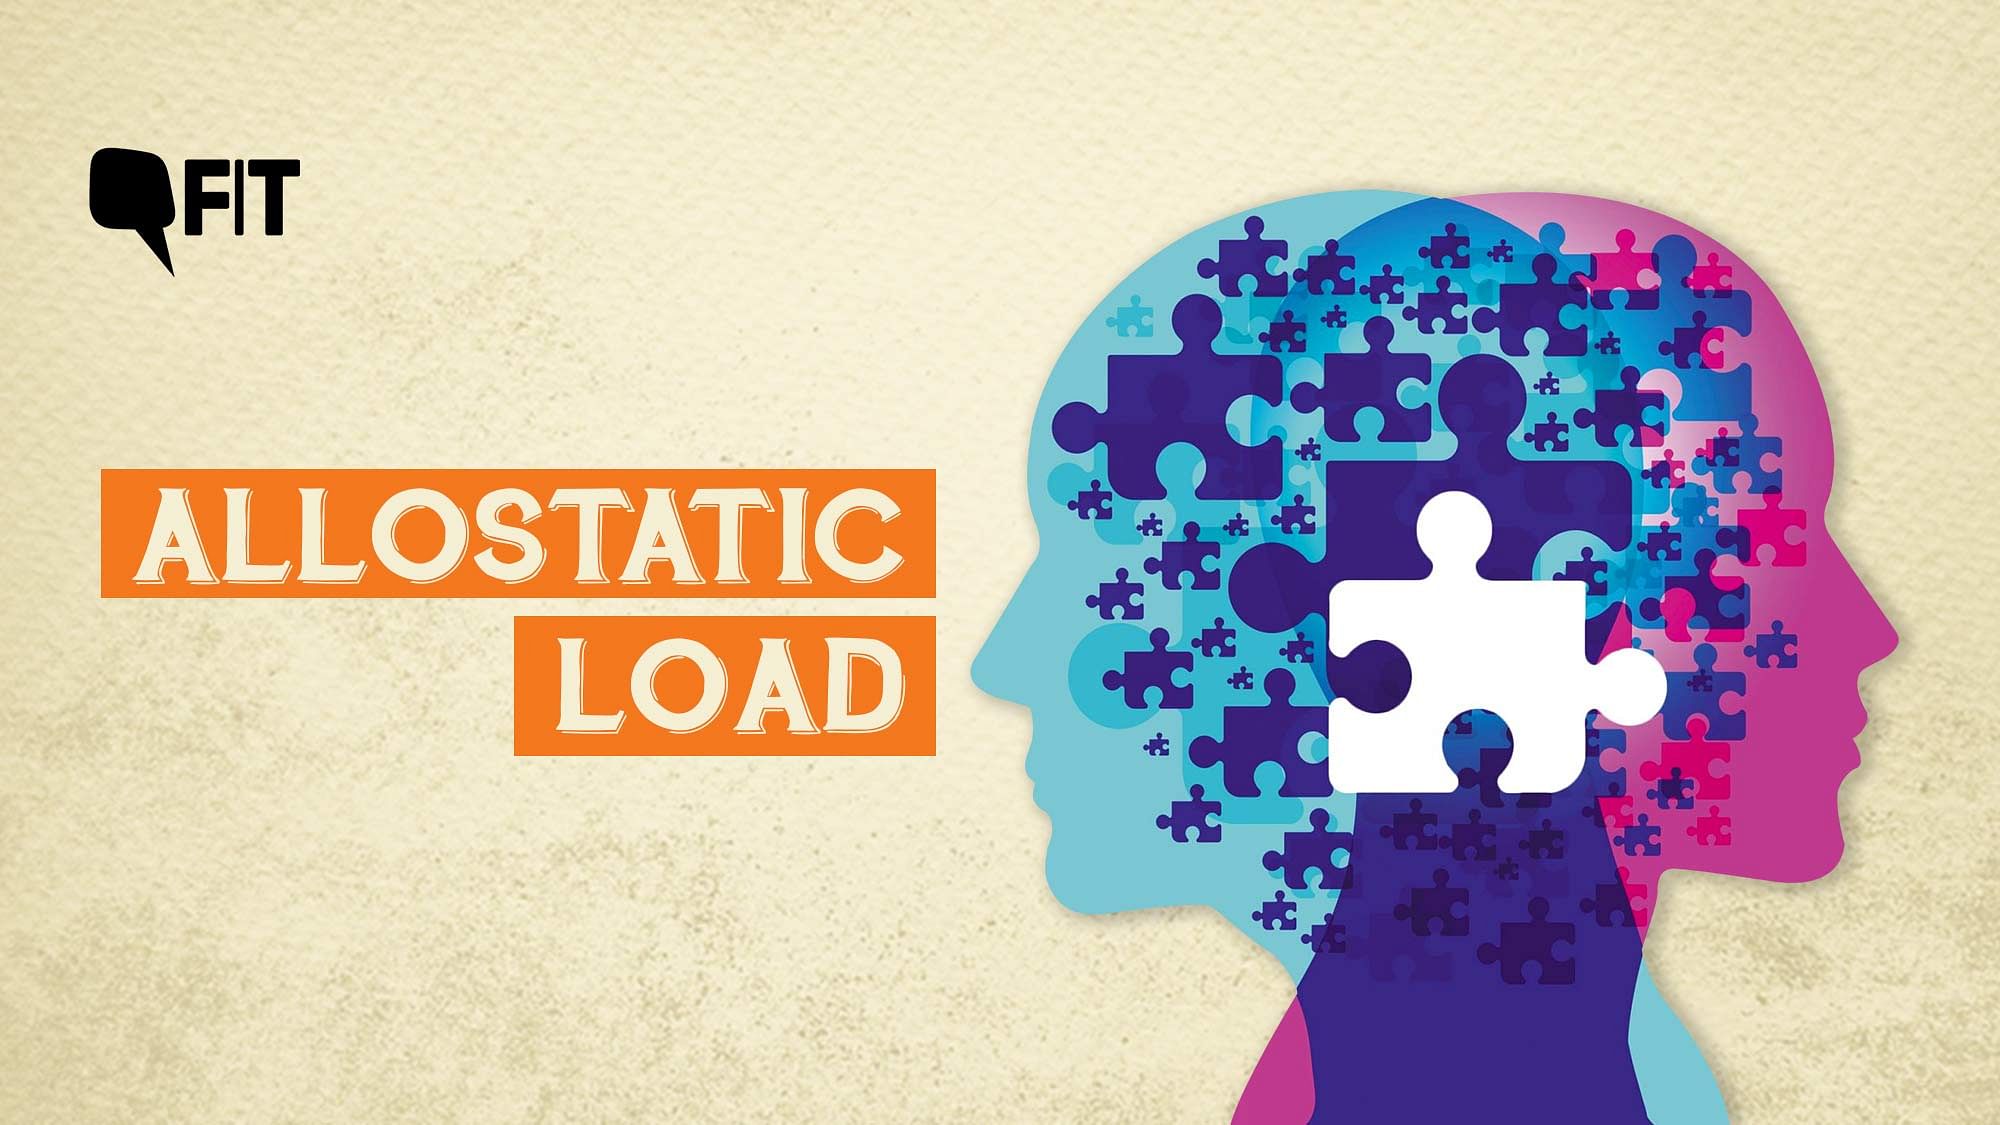 What is allostatic load?